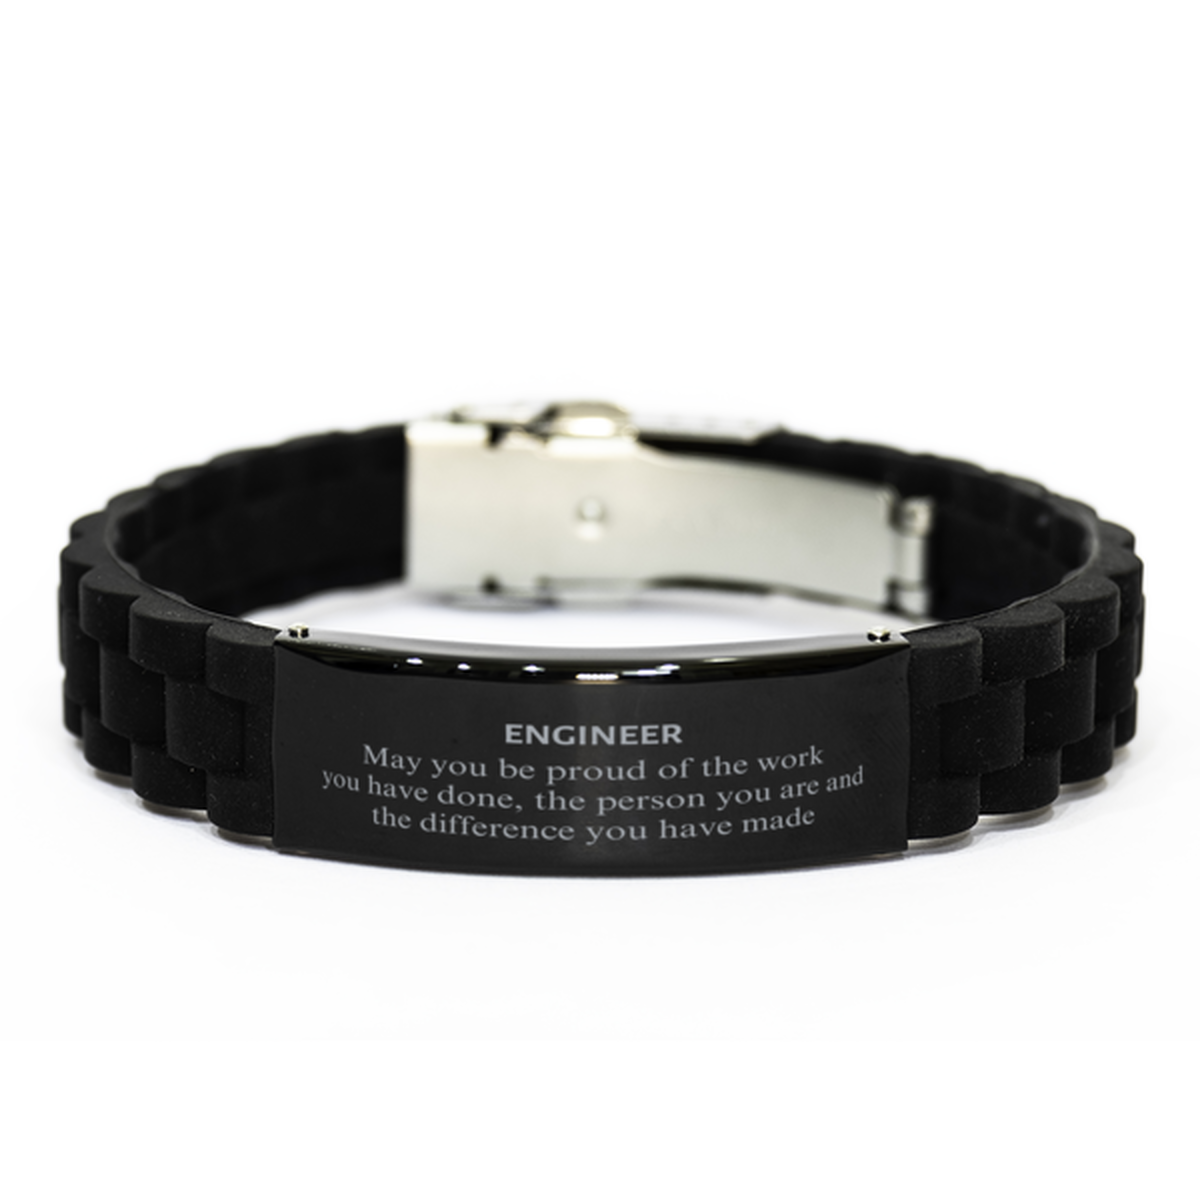 Engineer May you be proud of the work you have done, Retirement Engineer Black Glidelock Clasp Bracelet for Colleague Appreciation Gifts Amazing for Engineer